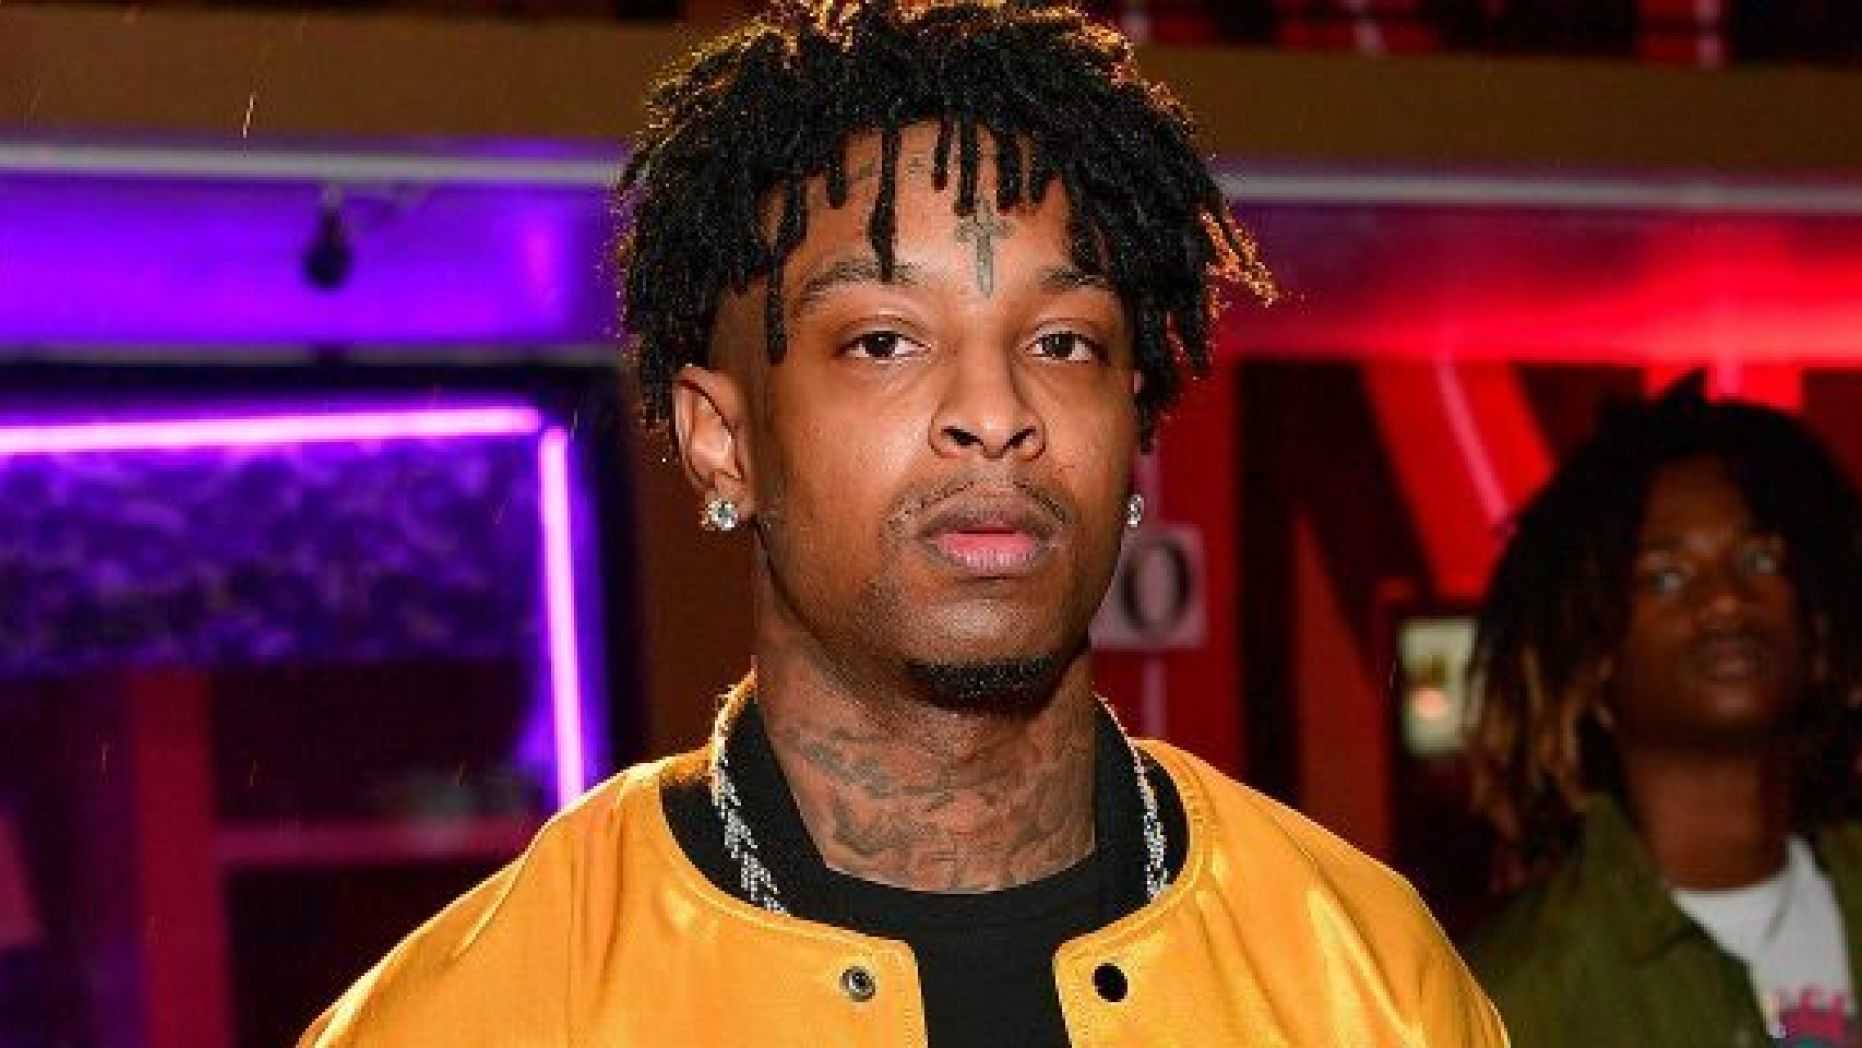 The 21st Most Popular Artist On Spotify Is 21 Savage